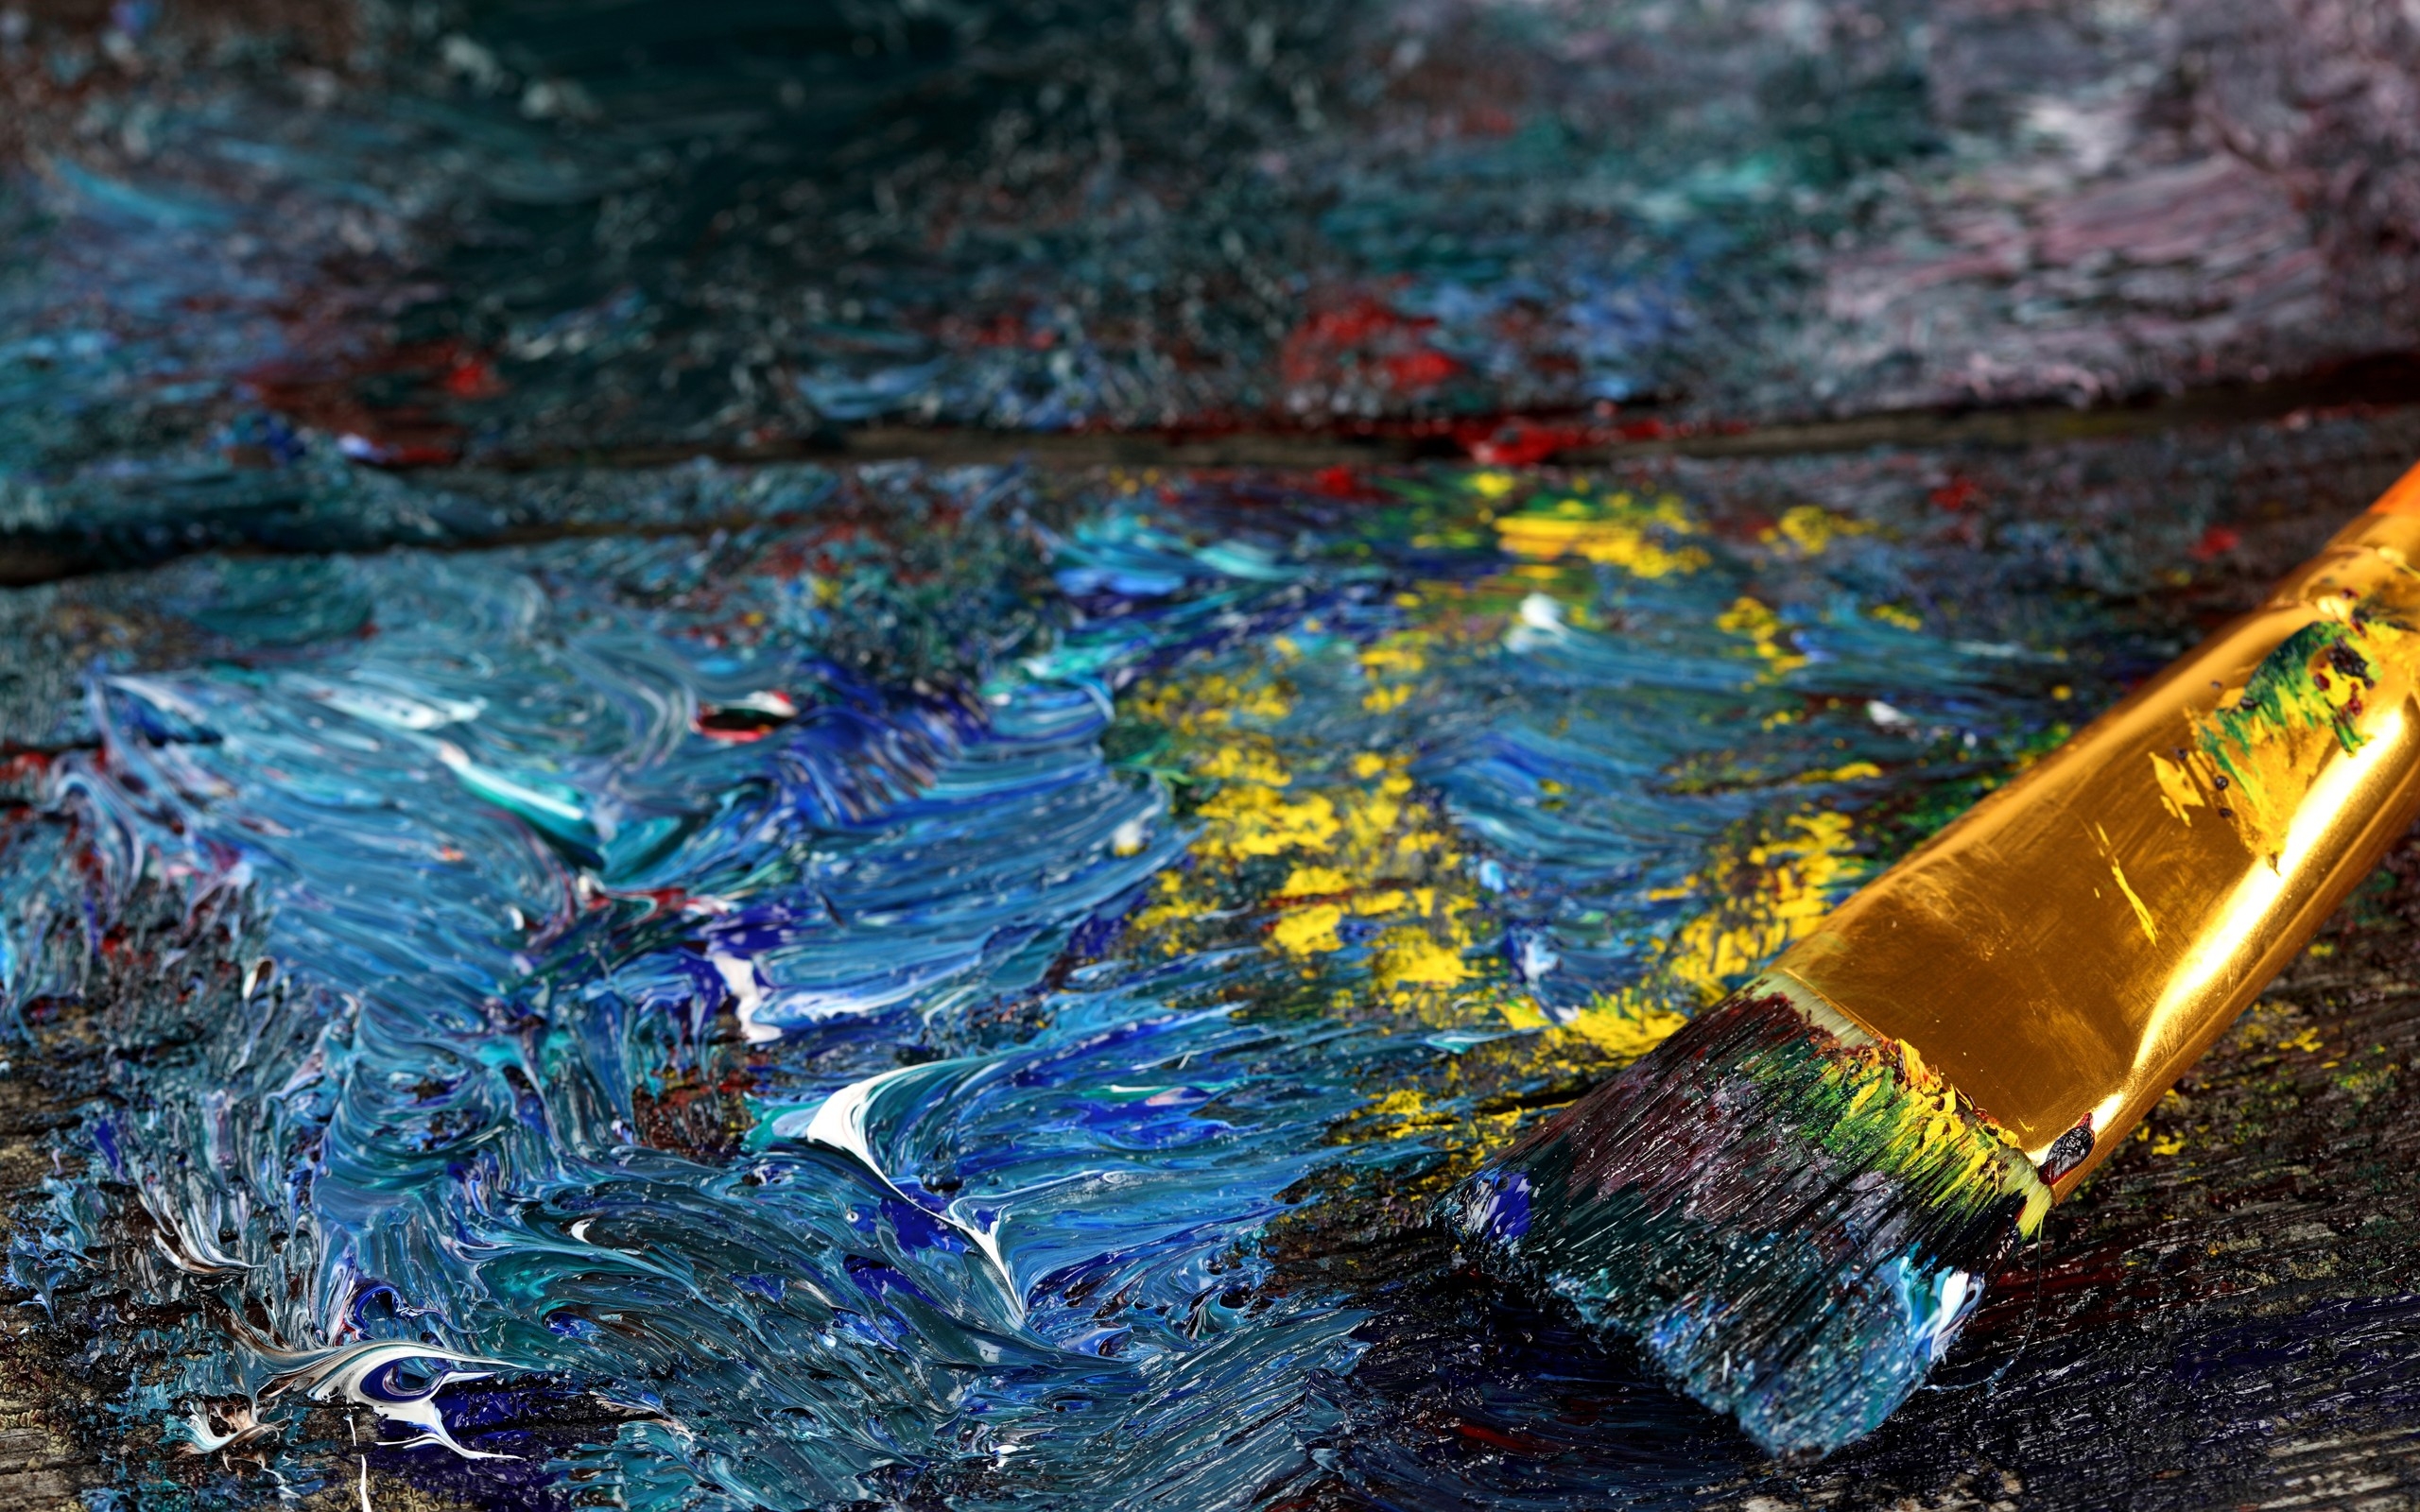 Wallpaper, painting, dark, water, rock, nature, reflection, ice, brush, canvas, ART, color, leaf, material, oil 2560x1600